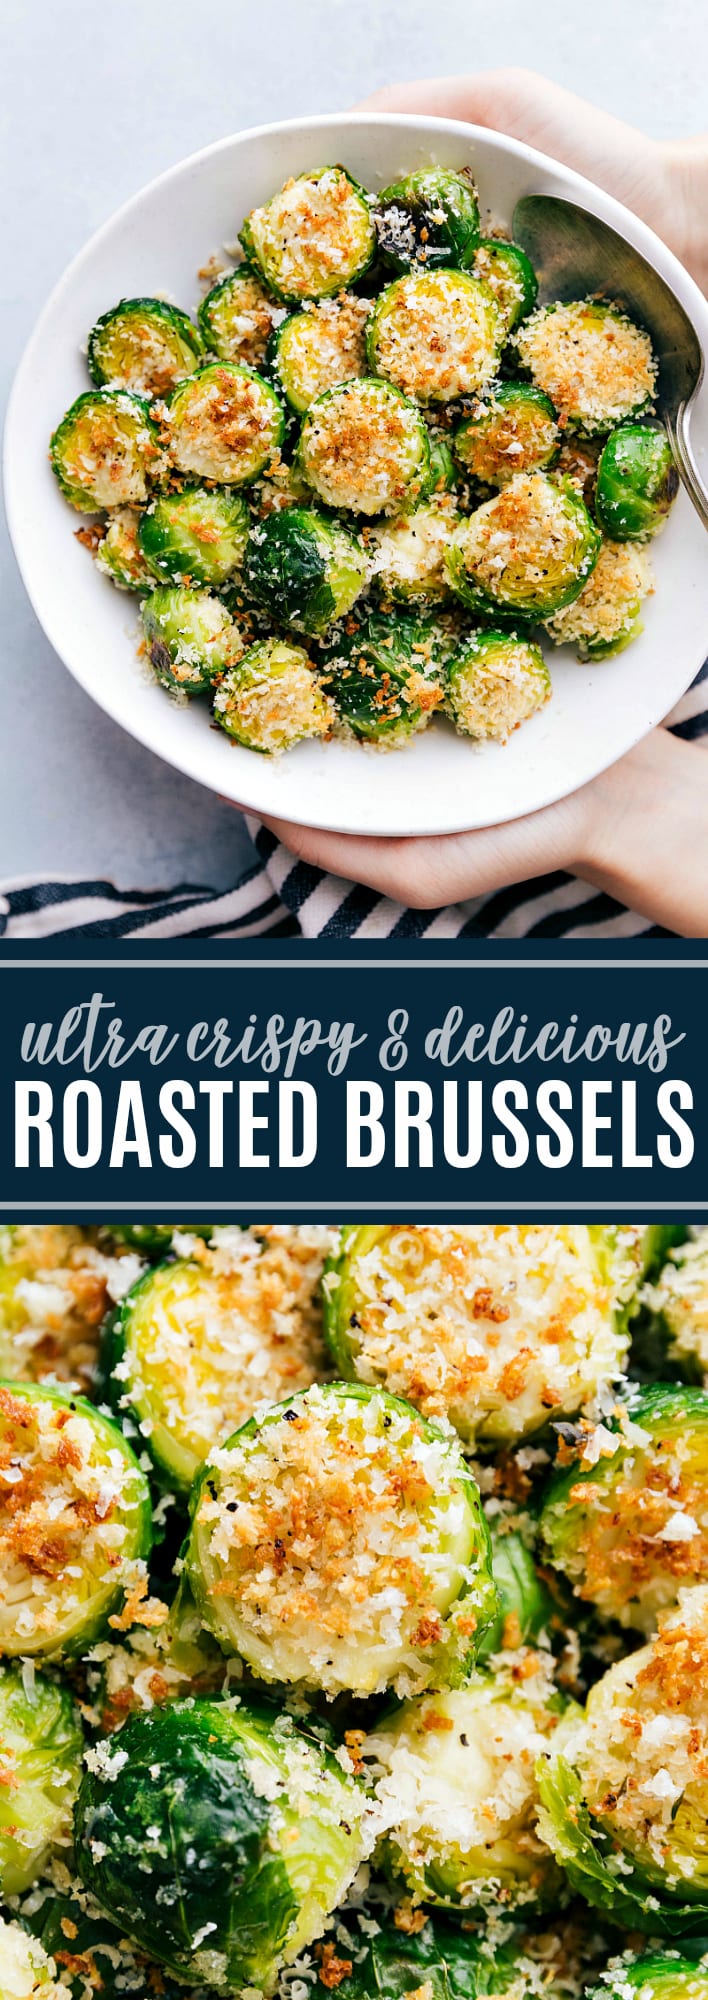 The BEST ultra crispy and flavorful roasted brussel sprouts via chelseasmessyapron.com. A few